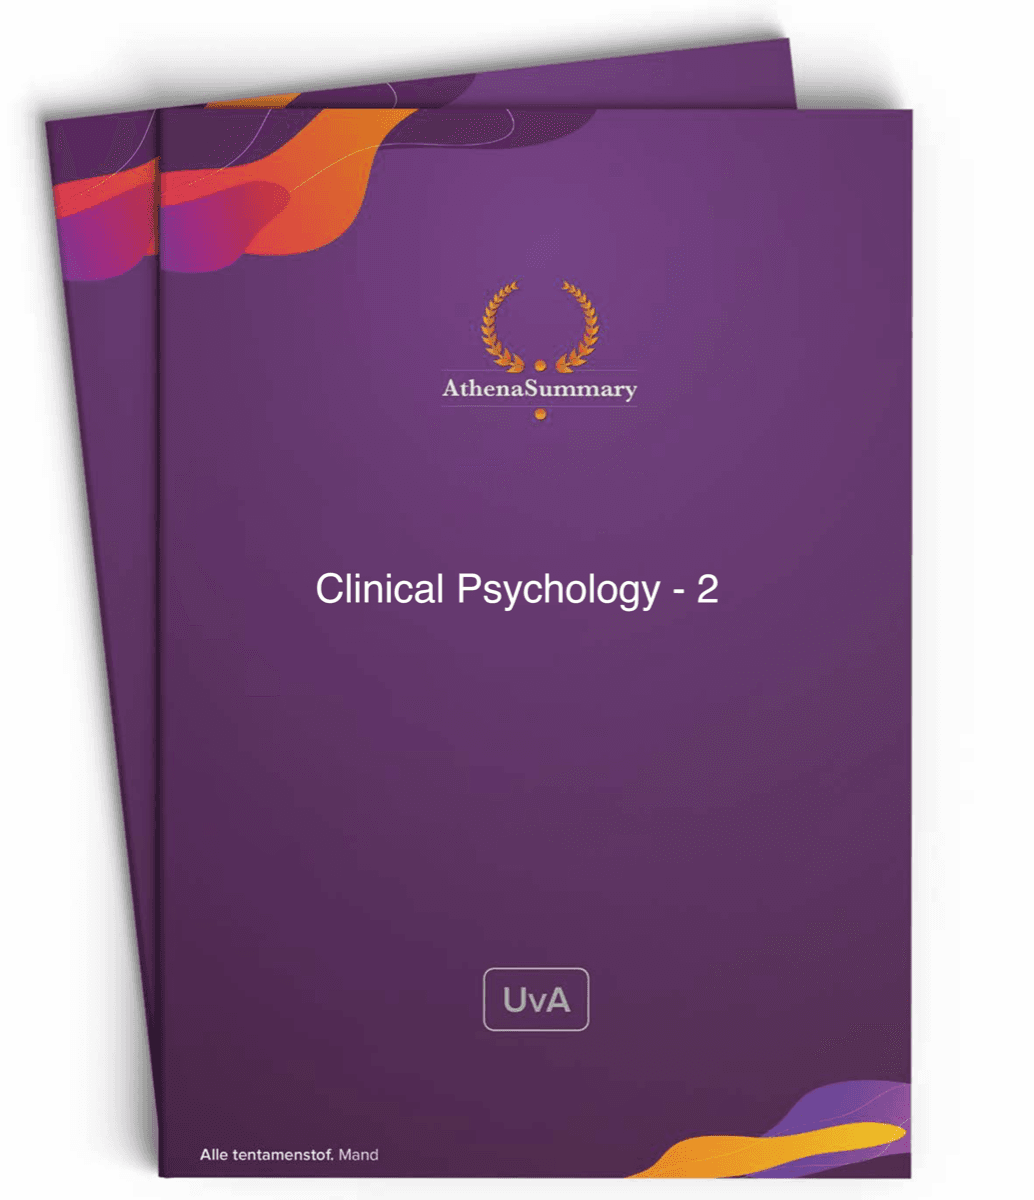 Literature Summary: Clinical Psychology - 2